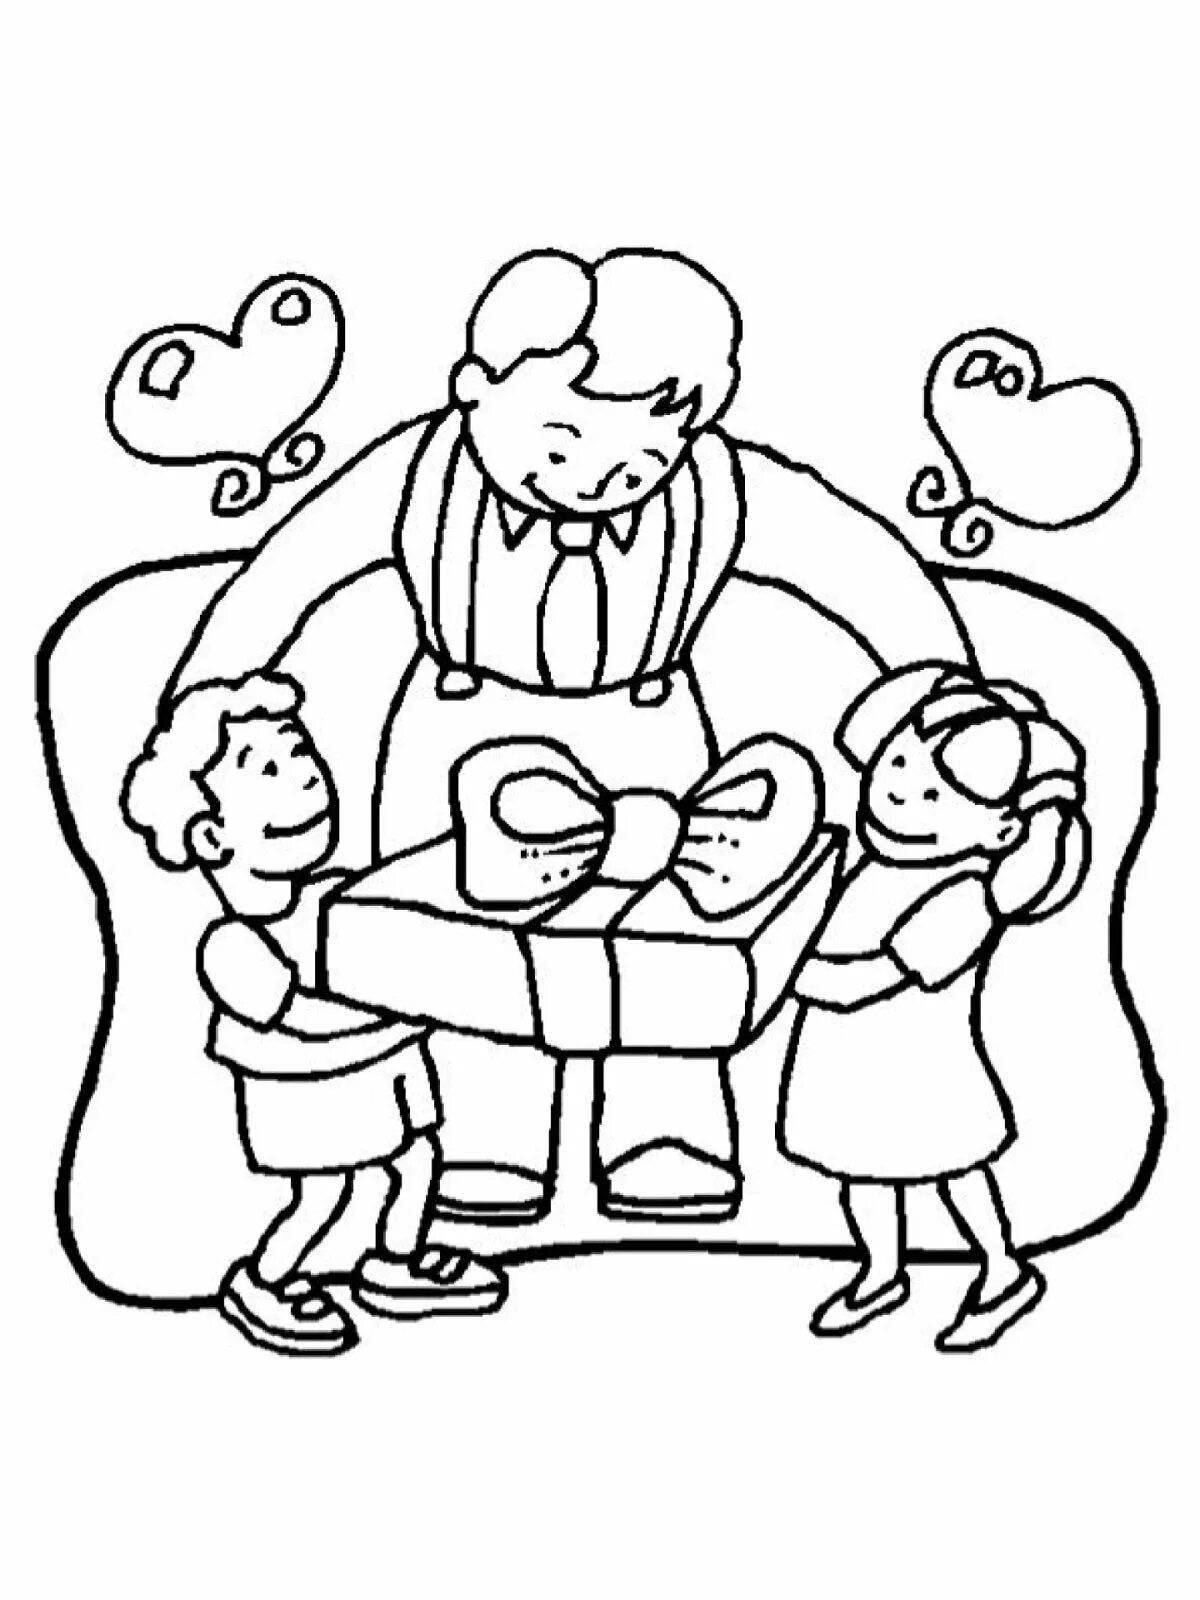 Coloring page loving grandfather and granddaughter